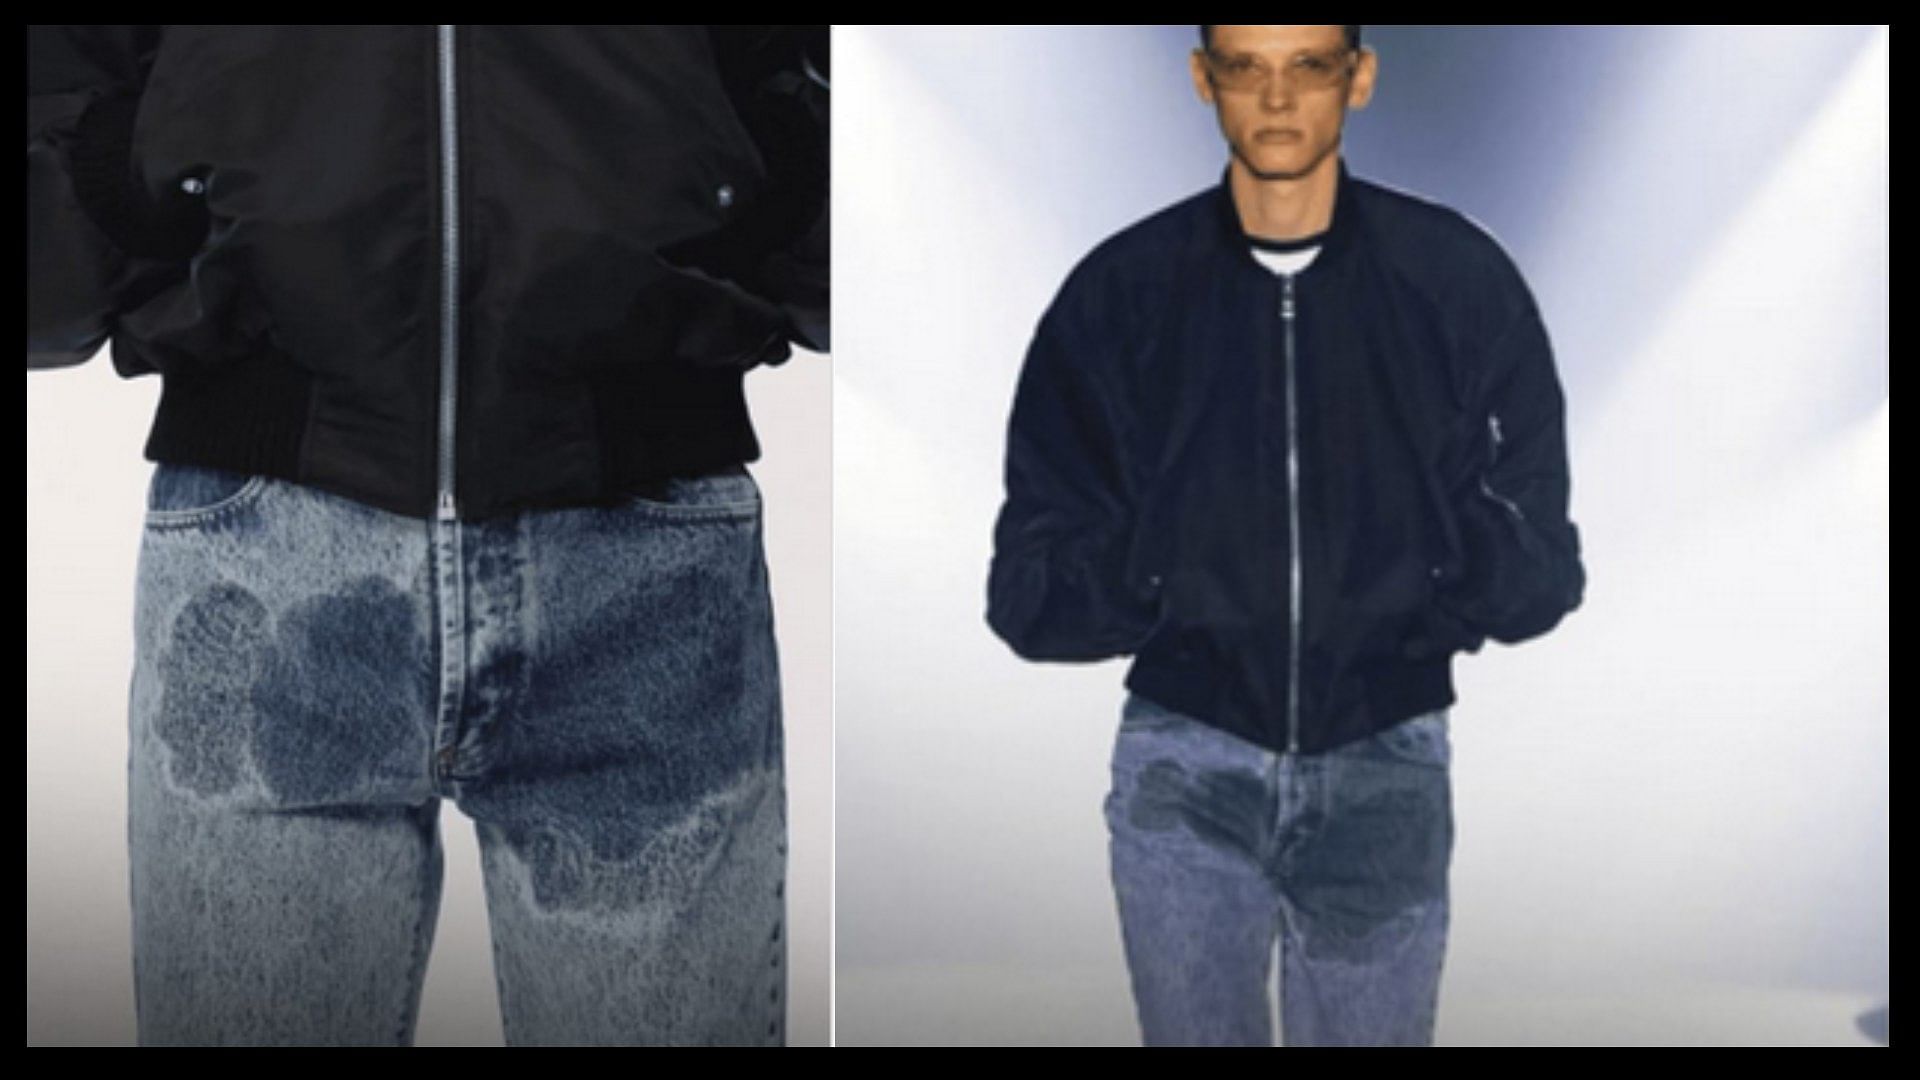 British italian brand sells jeans with pee stain for 50,000 viral on social media